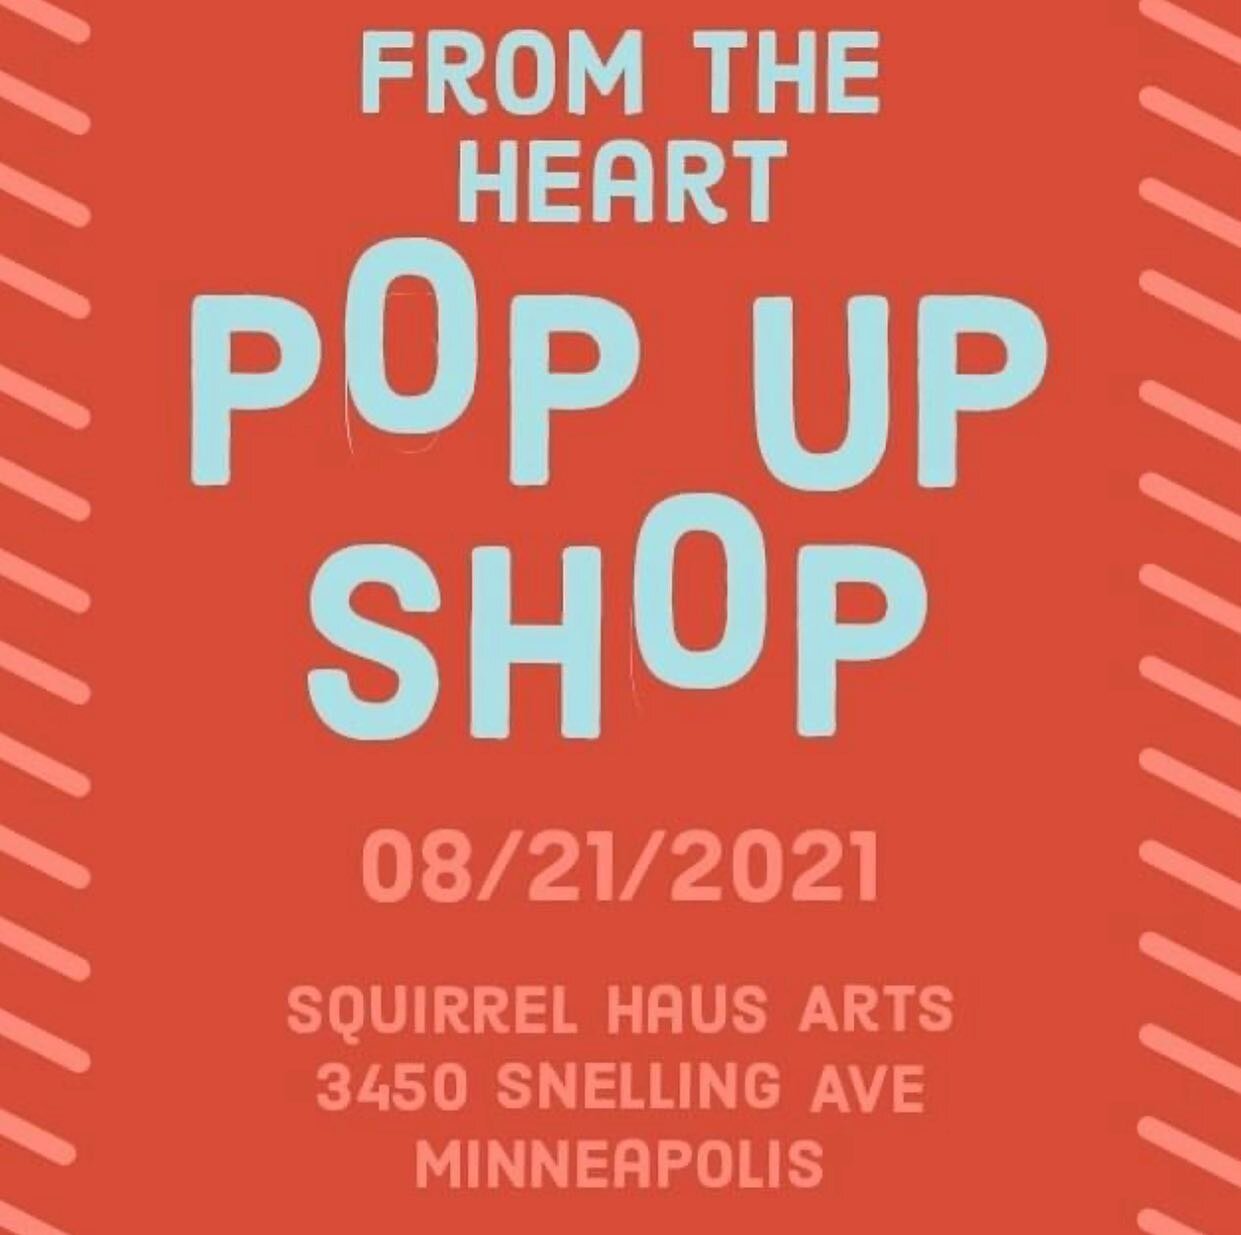 @lovelyorganicapothecary will be there so mark your calendars! (ahem with some pretty juicy sales and discounts on services and gc's!)